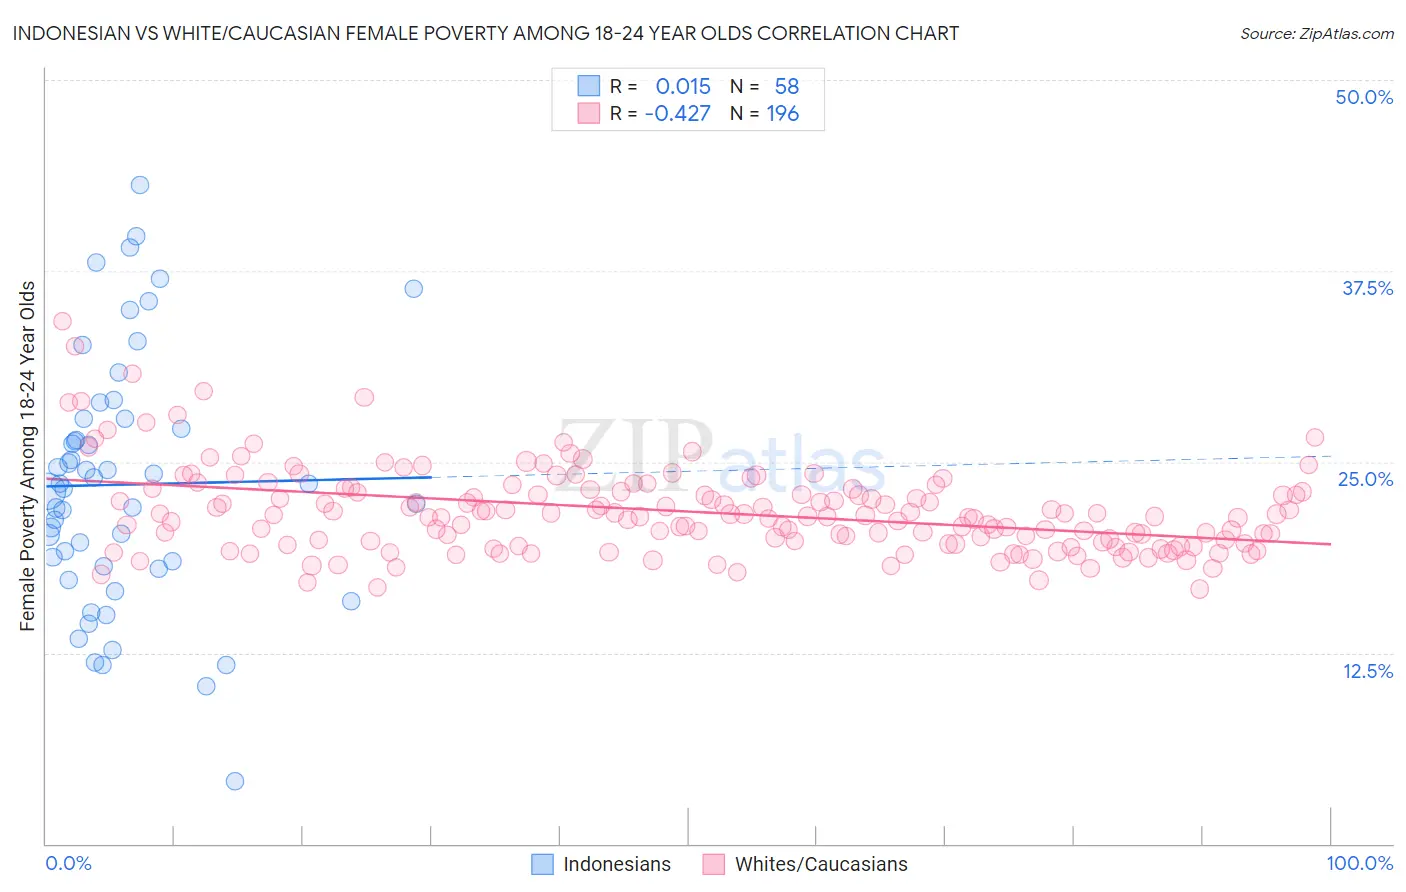 Indonesian vs White/Caucasian Female Poverty Among 18-24 Year Olds